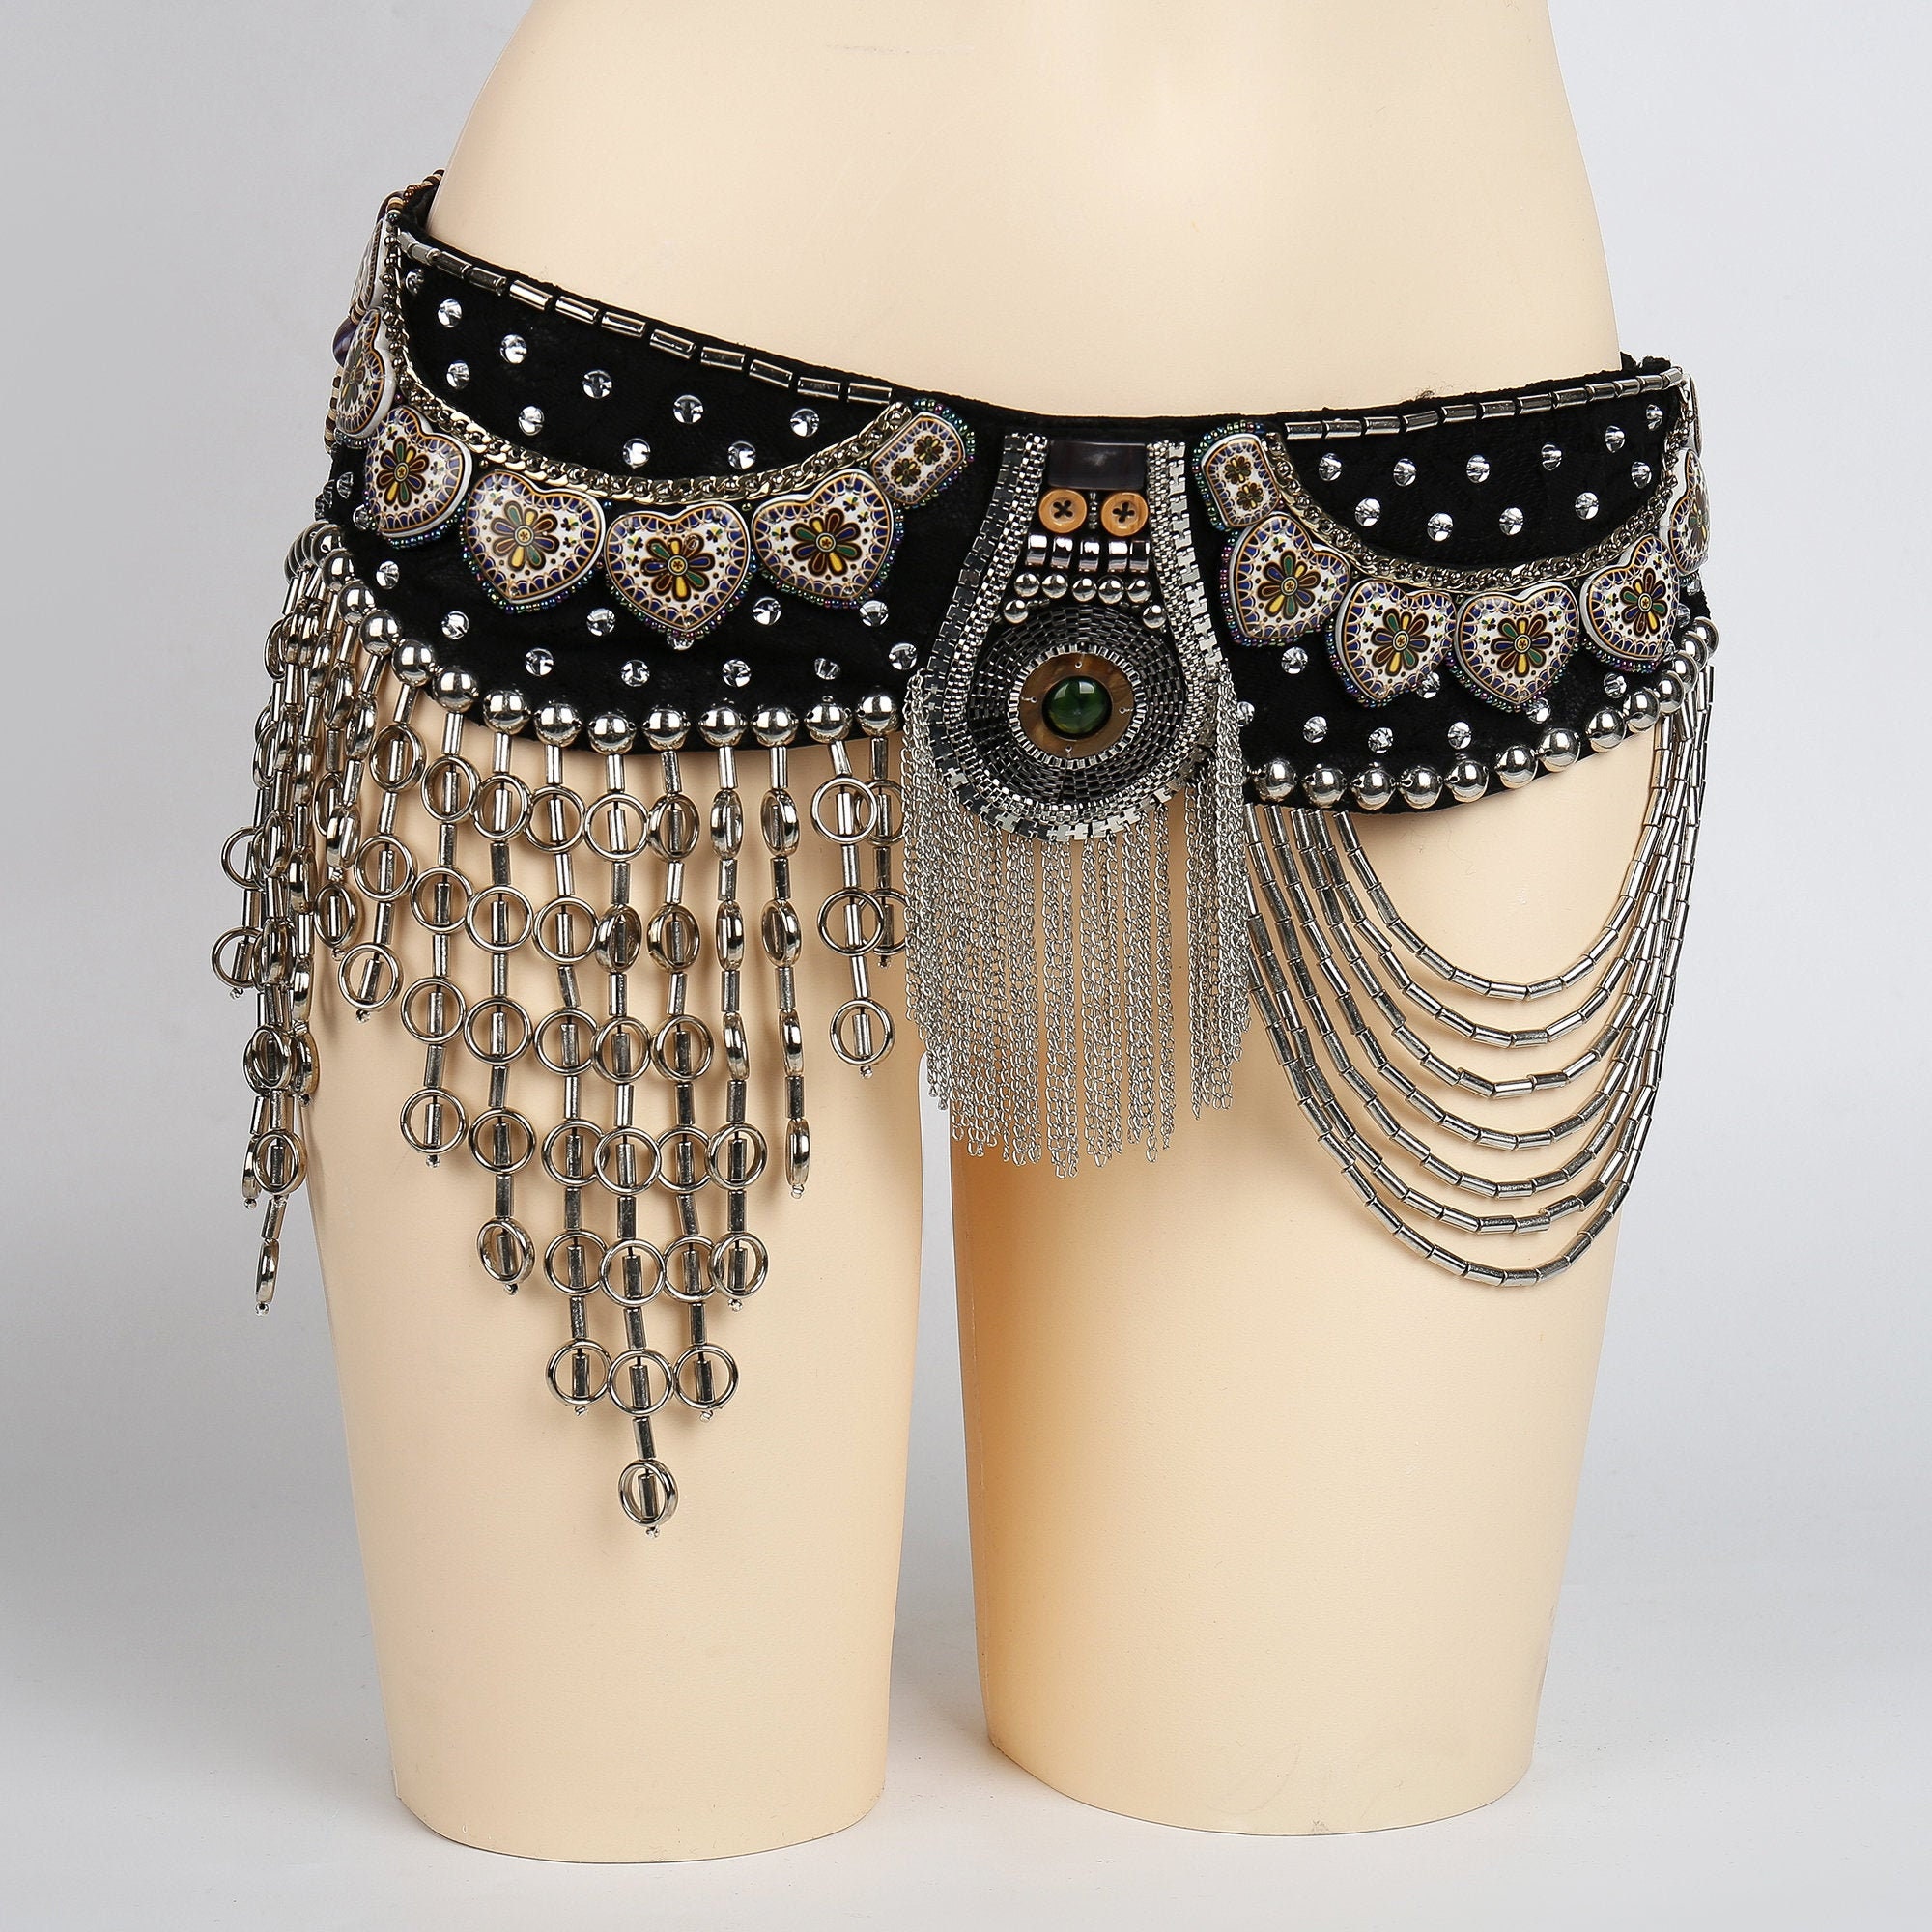 Punk Black Tribal Belly Dance Belt With Arabic Jewelry and Metal Chain  Drapes 